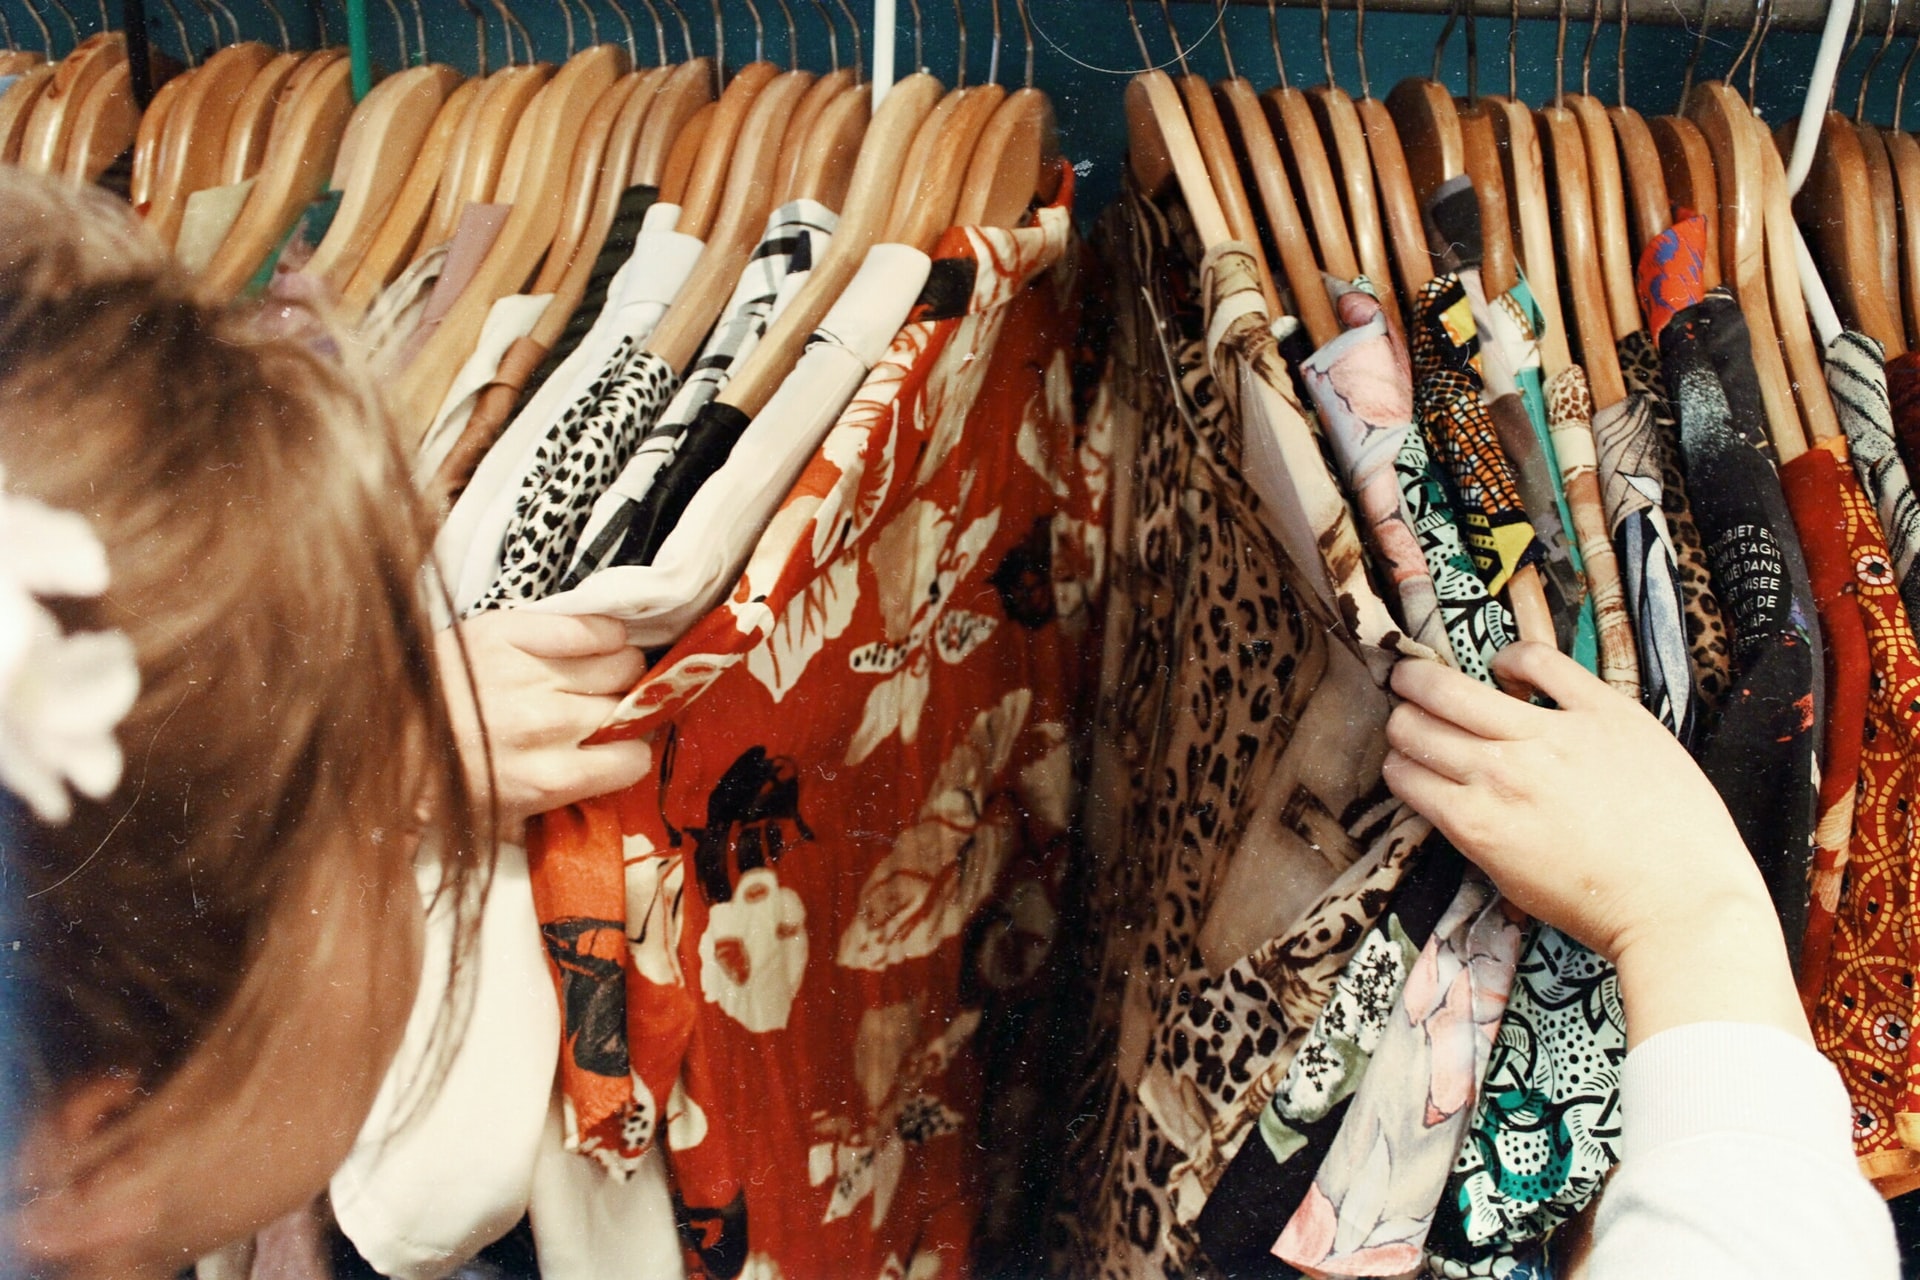 Young woman looking through patterned shirts in closet